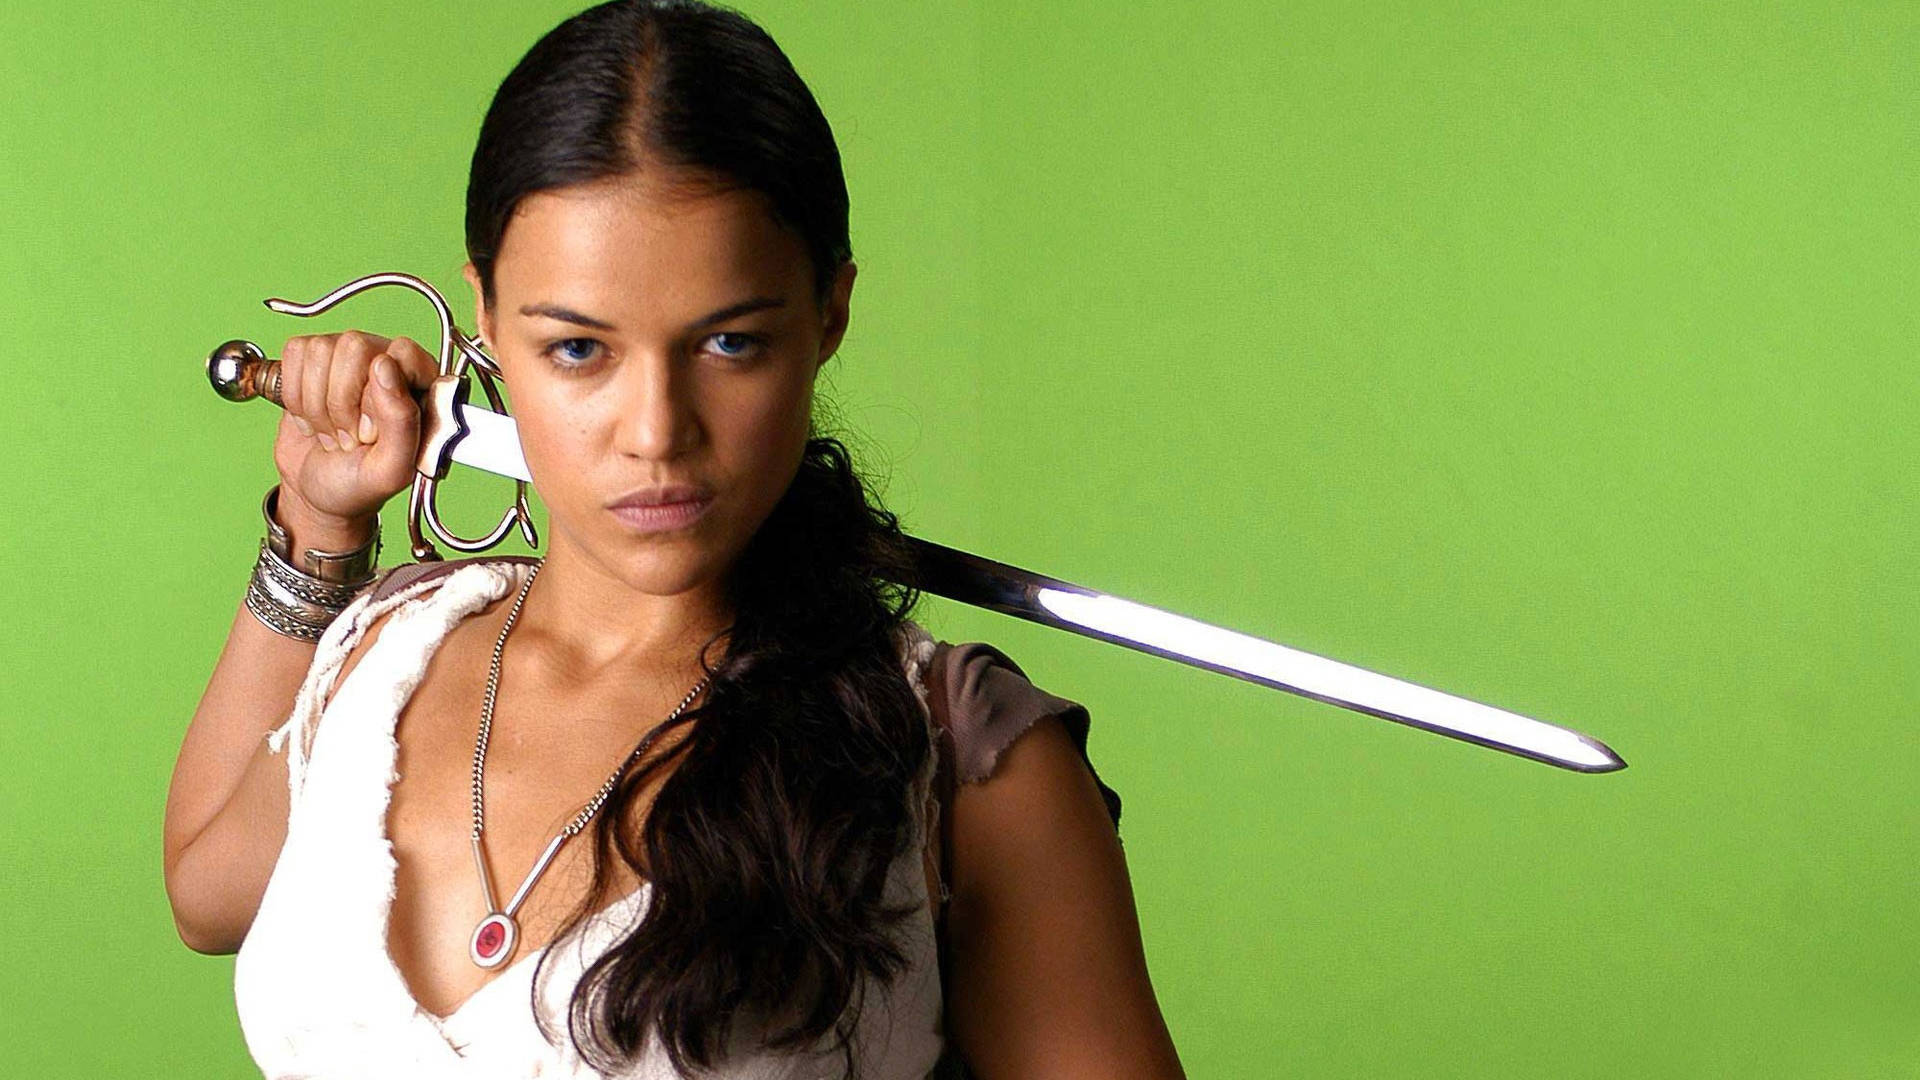 Michelle Rodriguez With A Sword Wallpaper